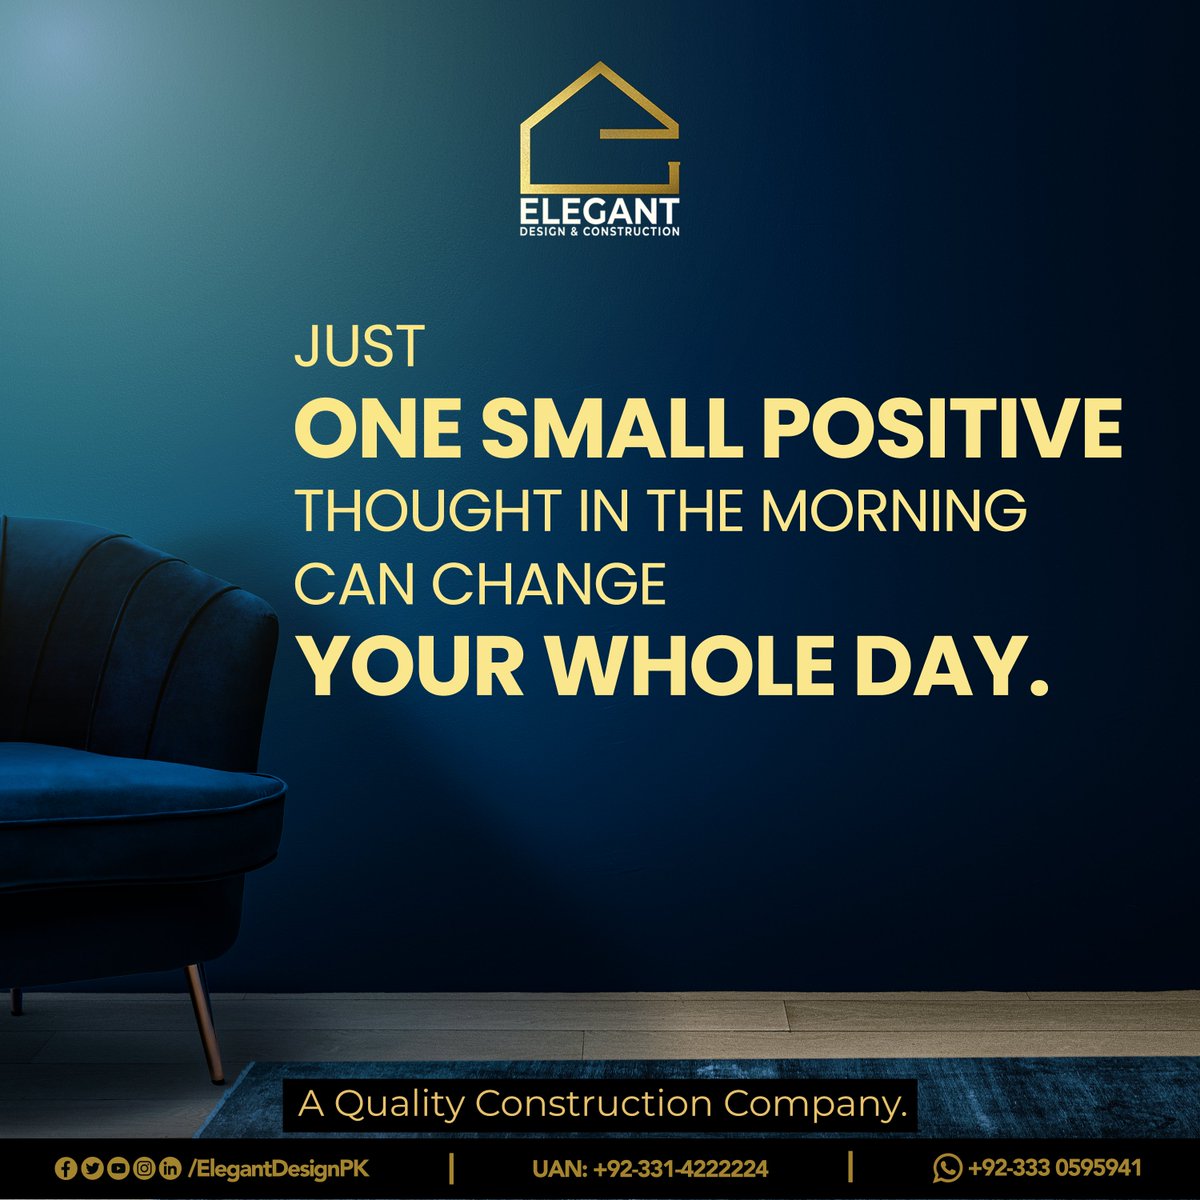 Elevate Your Week with Elegant Design and Construction's Monday Motivation! Mondays are a canvas for a fresh start and a week full of possibilities. Let's begin with the commitment to create spaces of timeless elegance.
#Motivation #ElegantDesign #ConstructionGoals #DreamHome